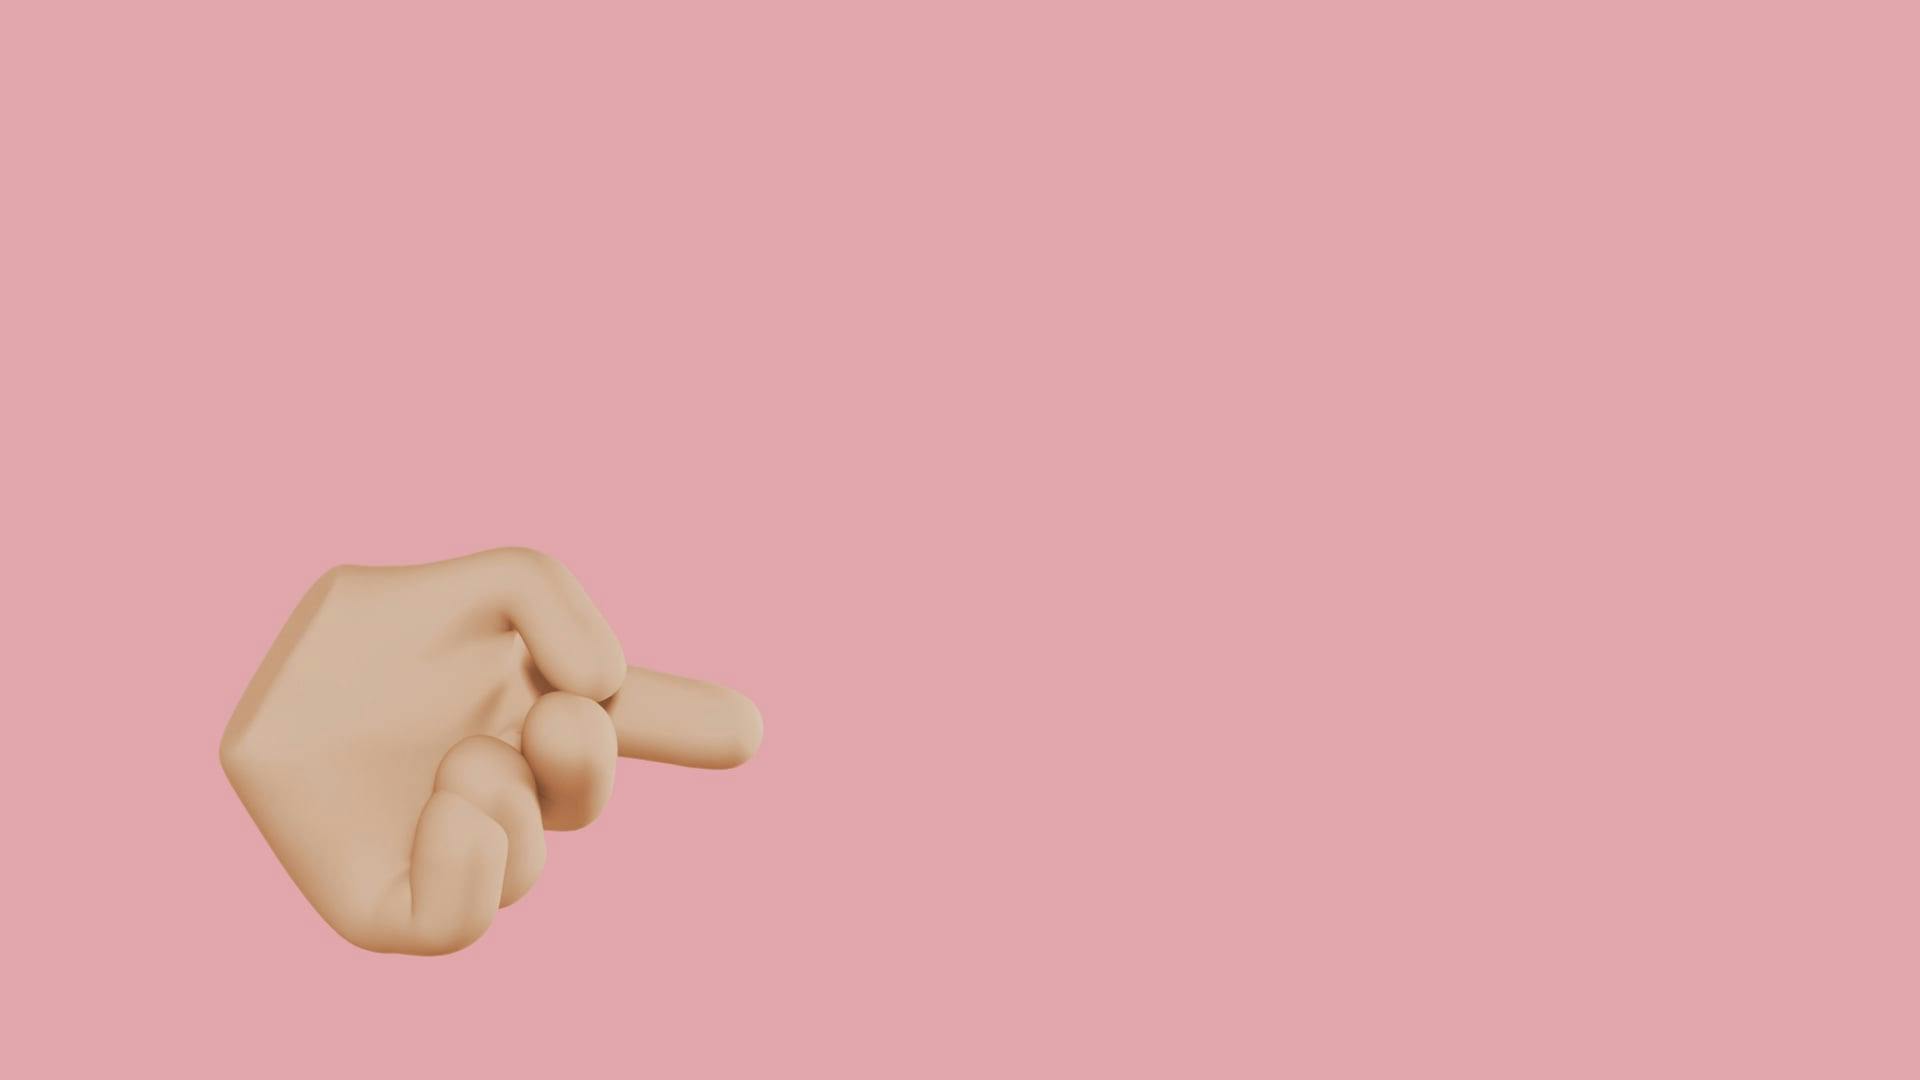 An Animation of an Index Finger Pointing Straight · Free Stock Video